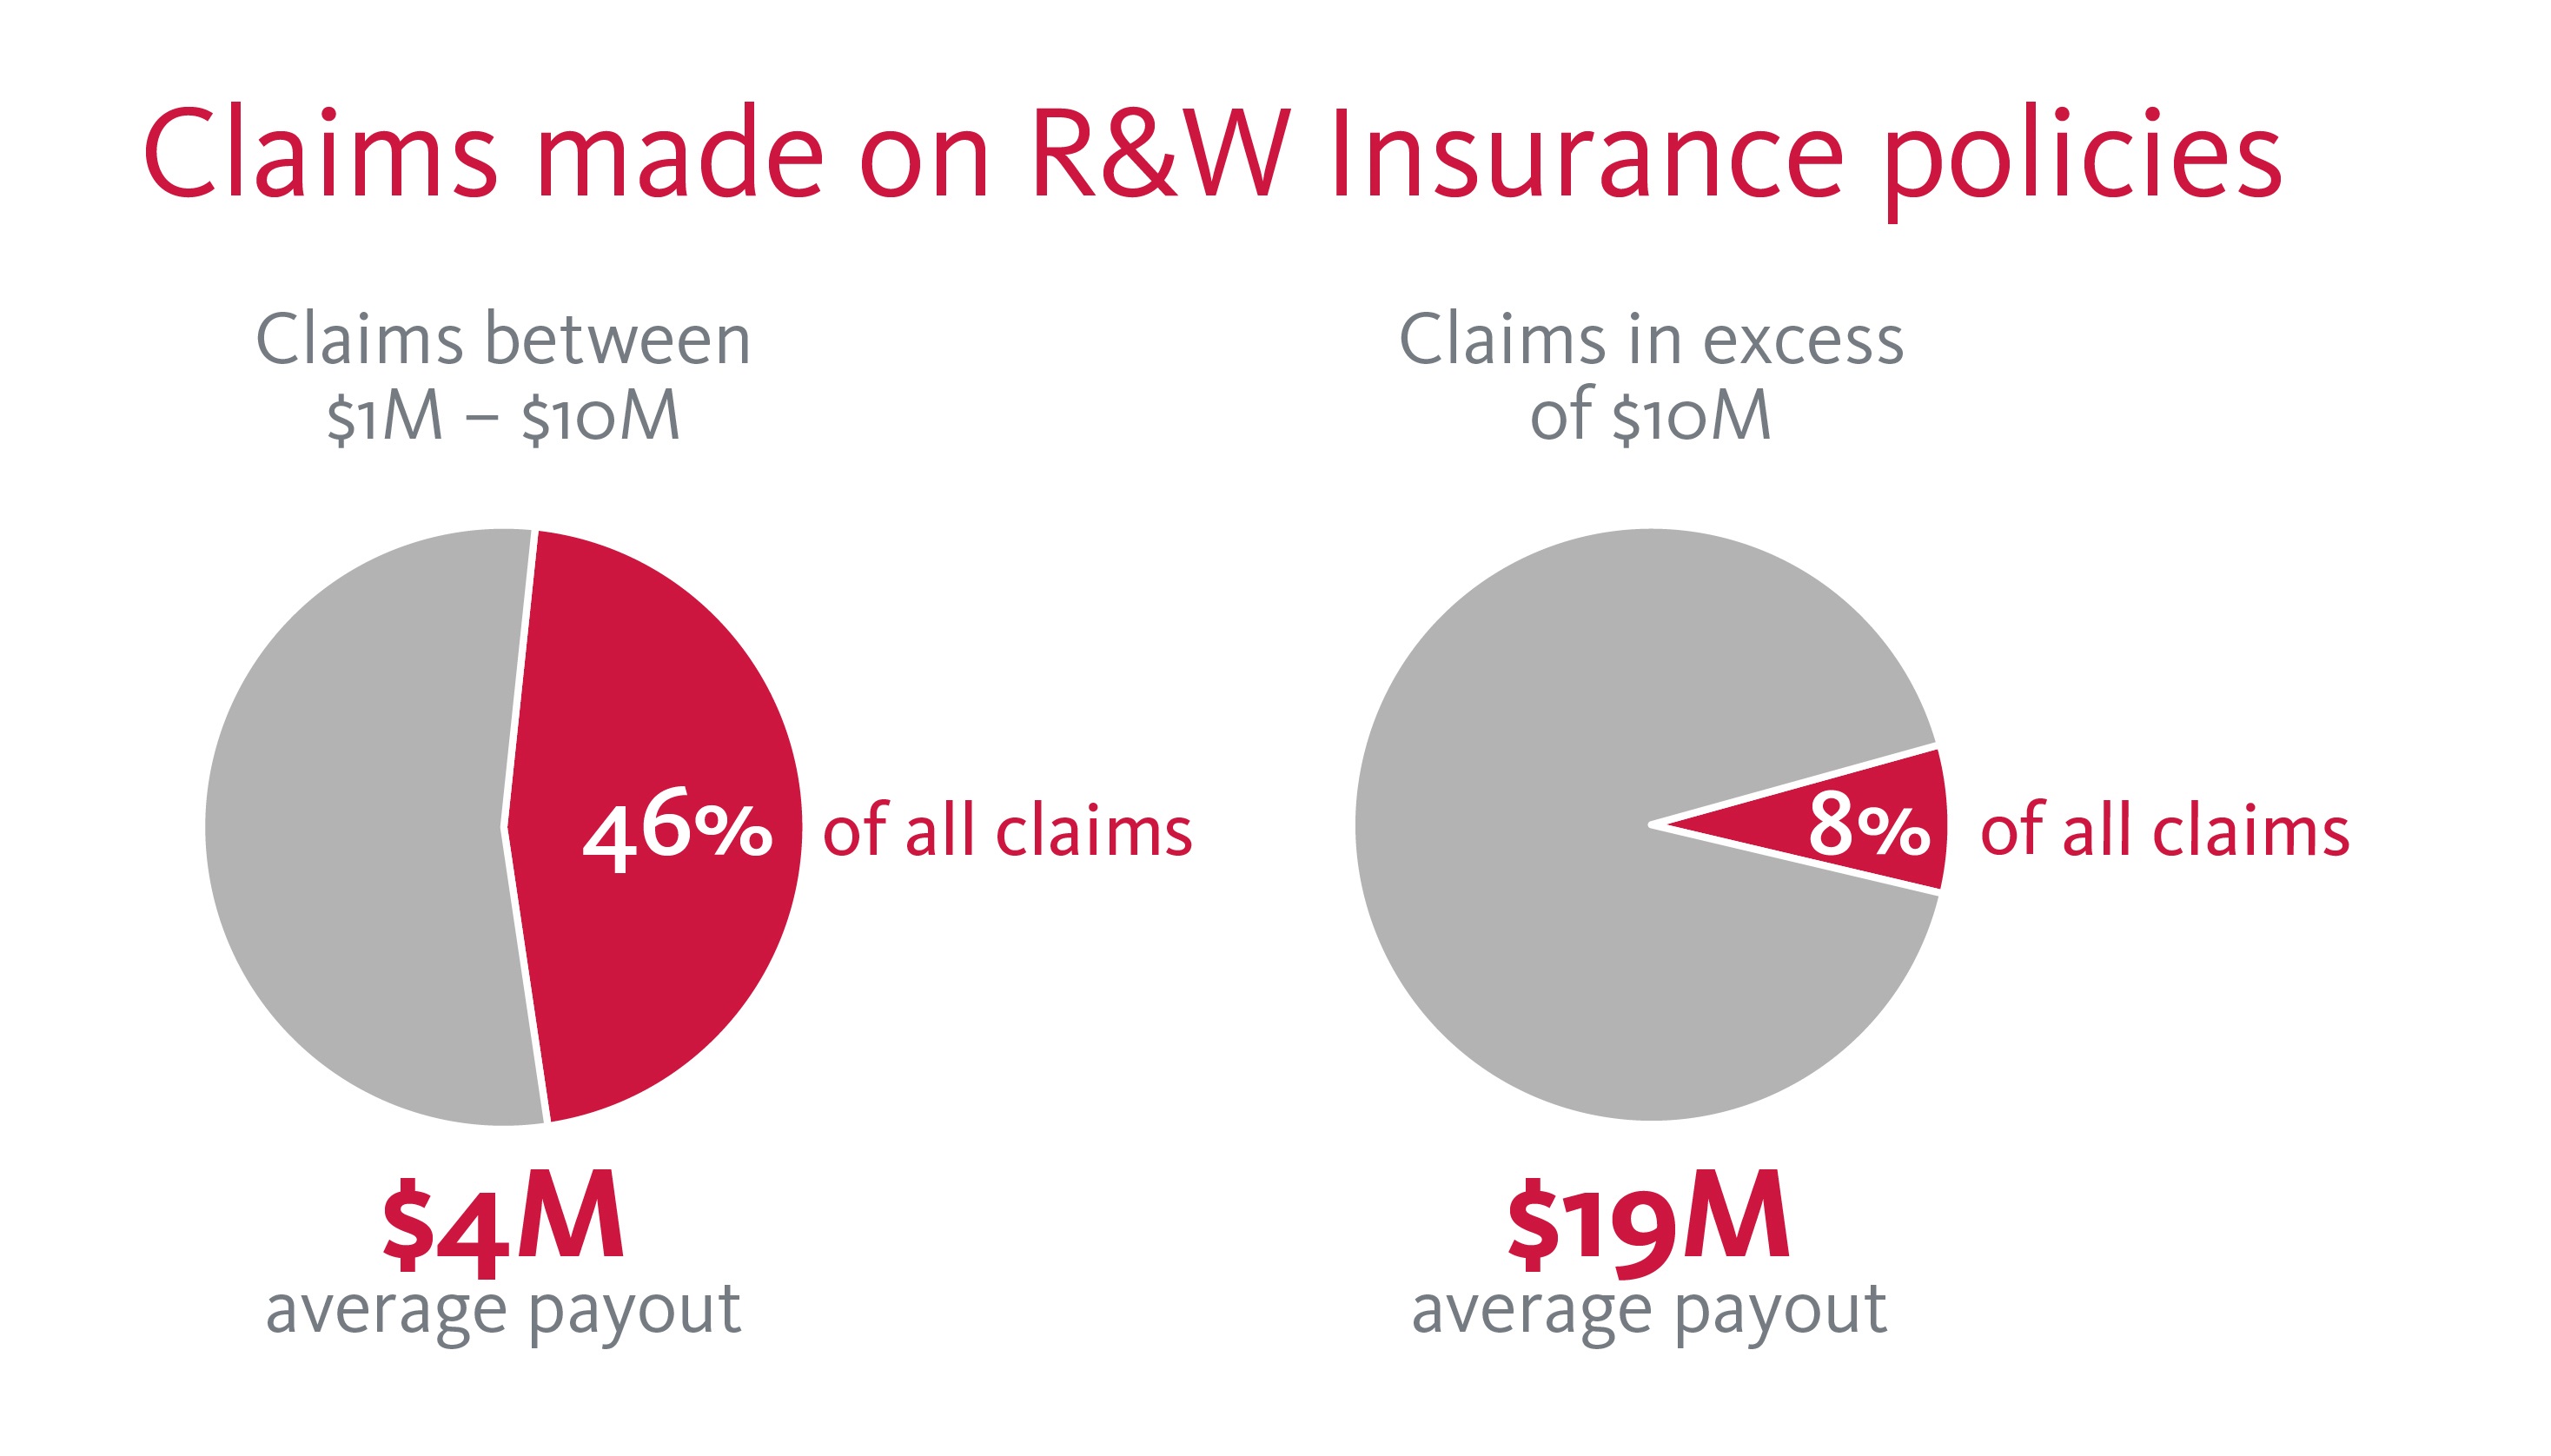 Claims made on R&W Insurance policies